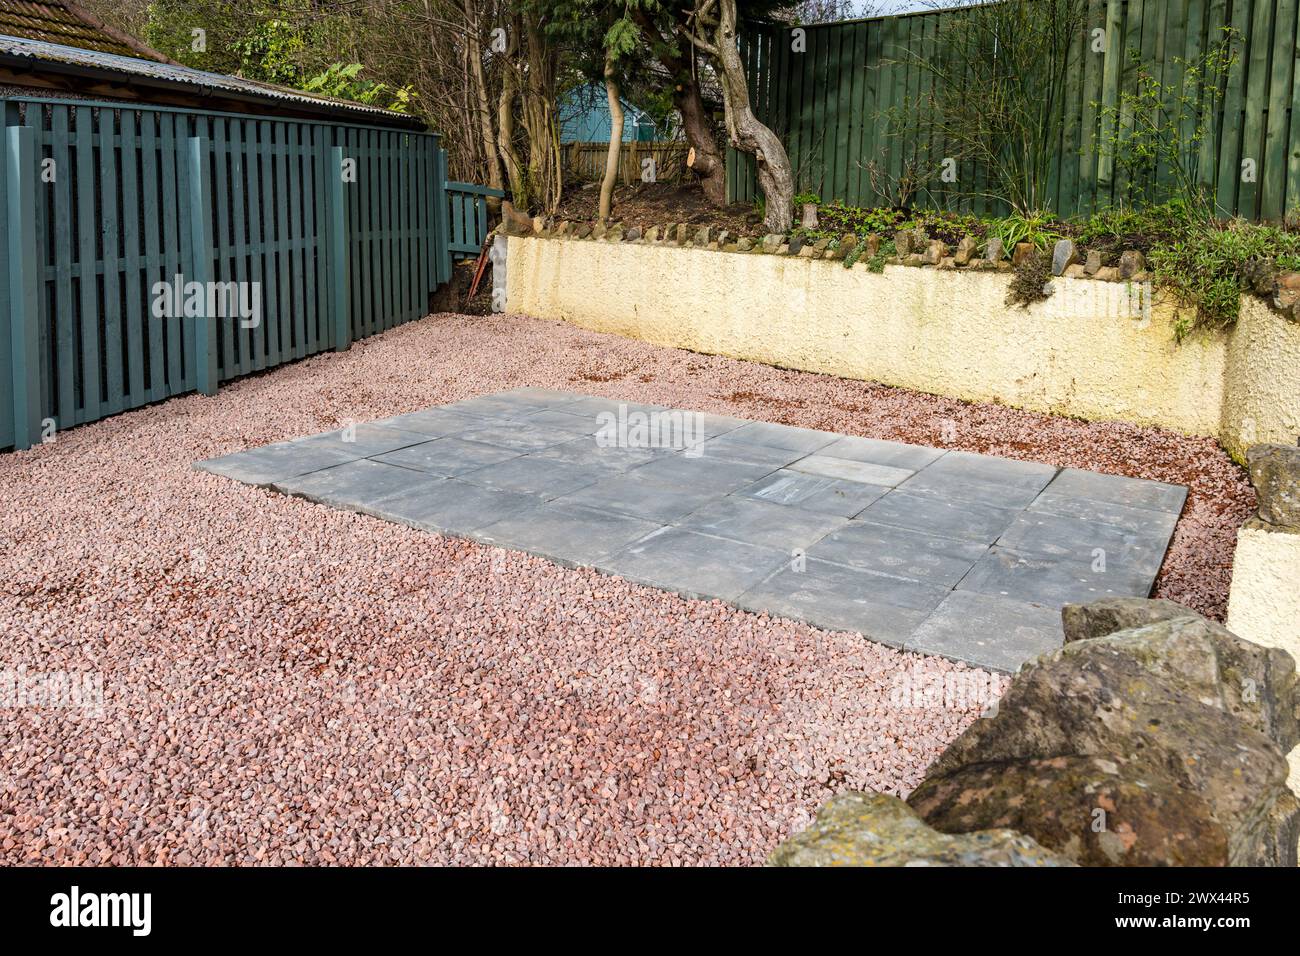 Slab base laid and constructed for erection of a garden room in a driveway, Scotland, UK Stock Photo